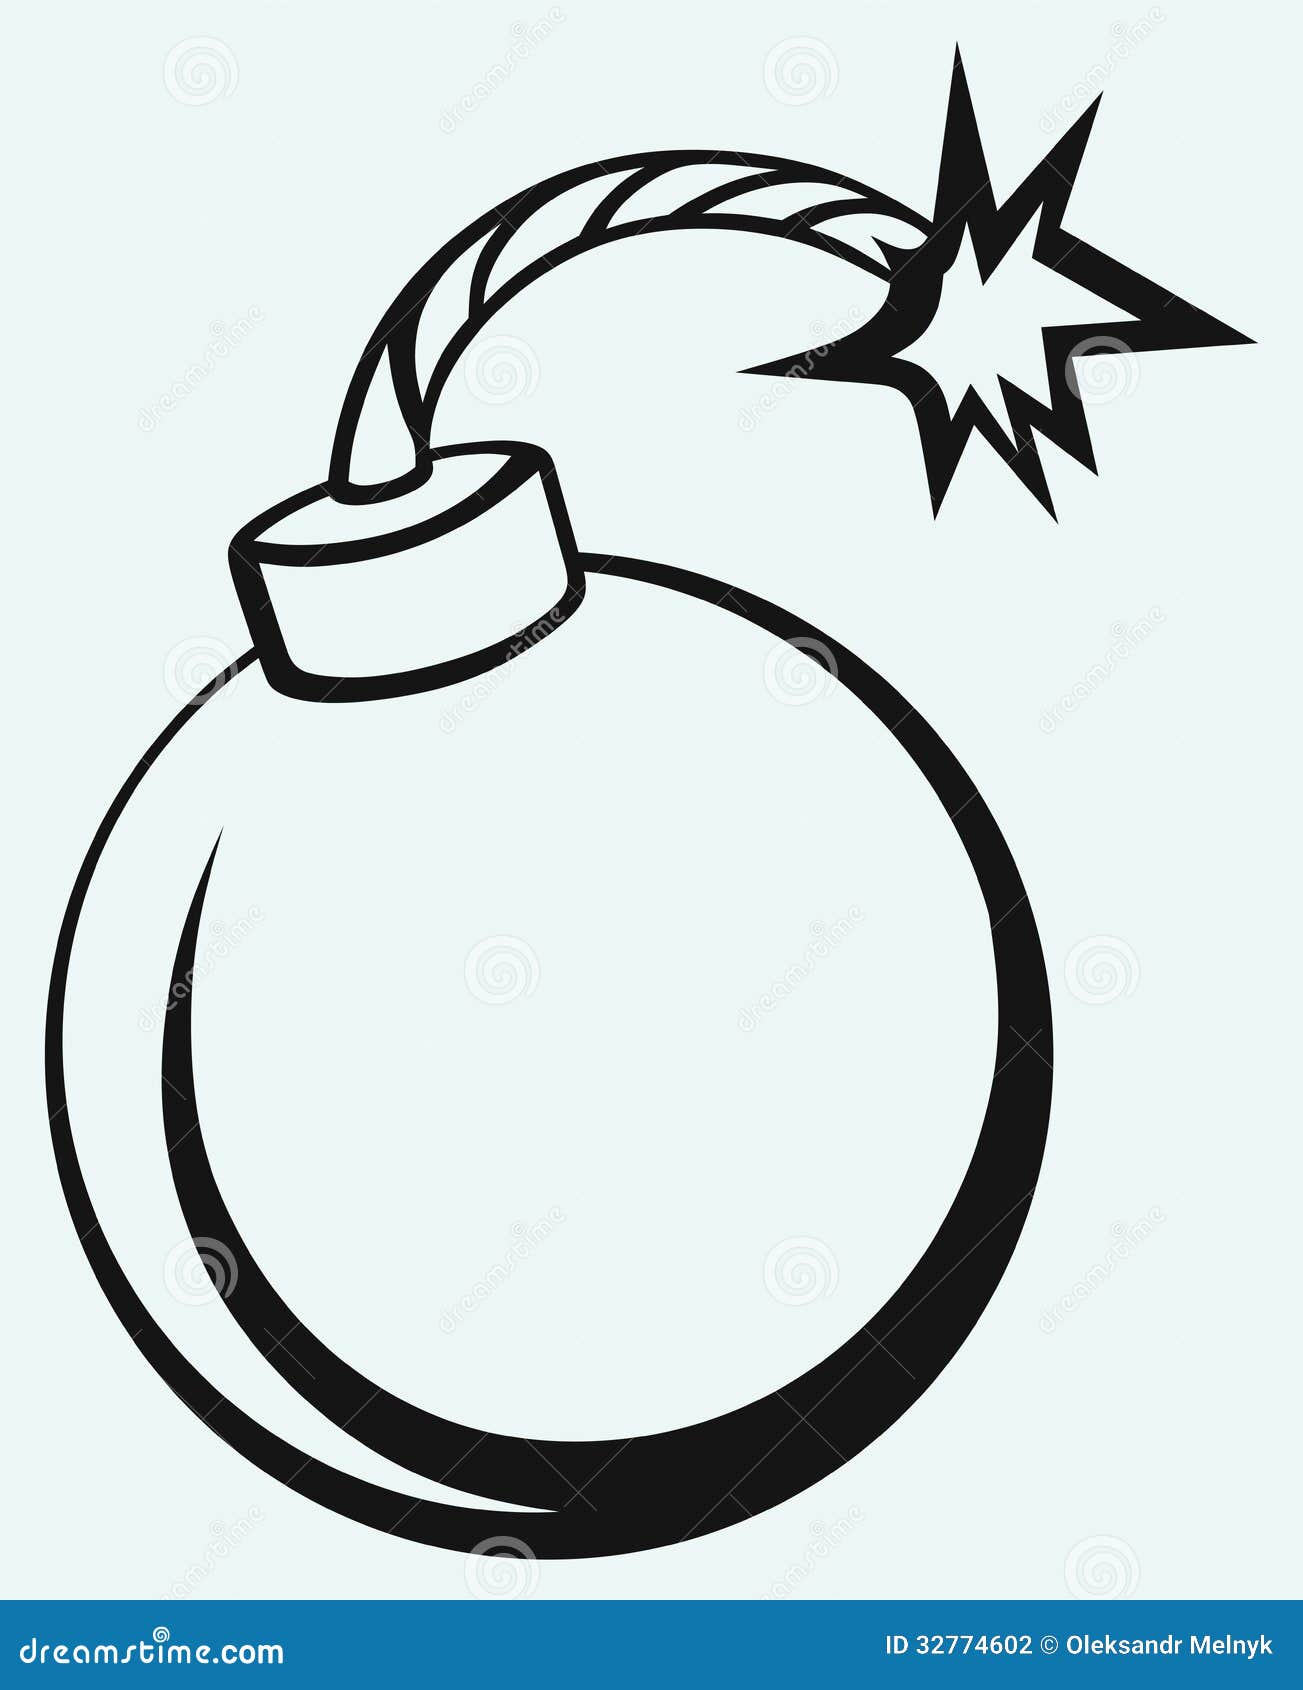 Silhouette bomb stock vector. Illustration of drawing - 32774602